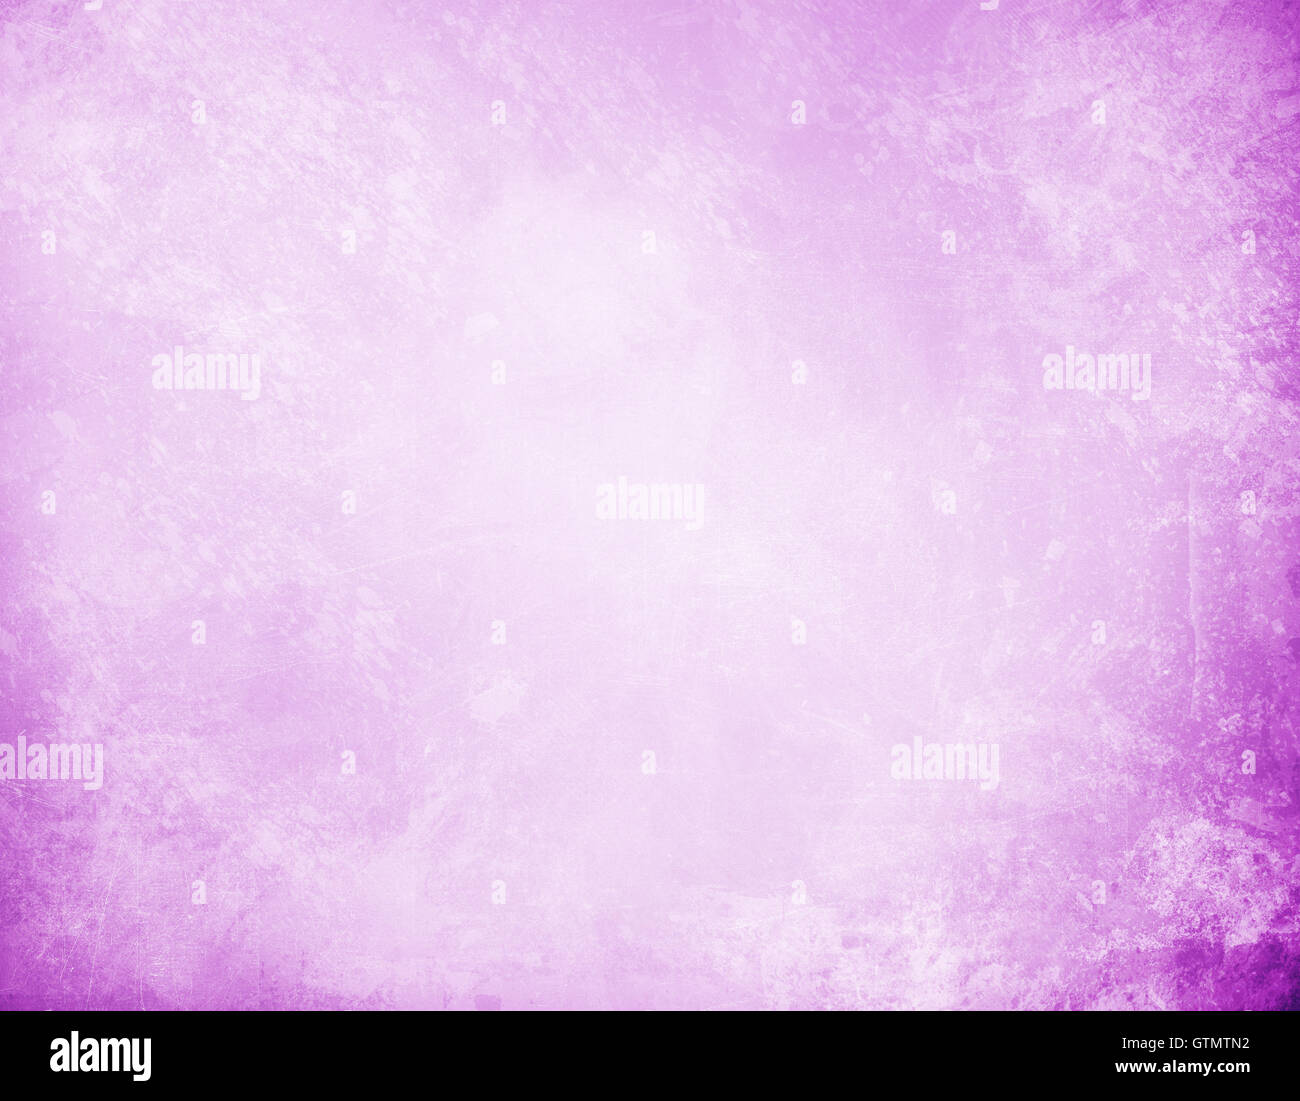 Grunge background with space for text Stock Photo